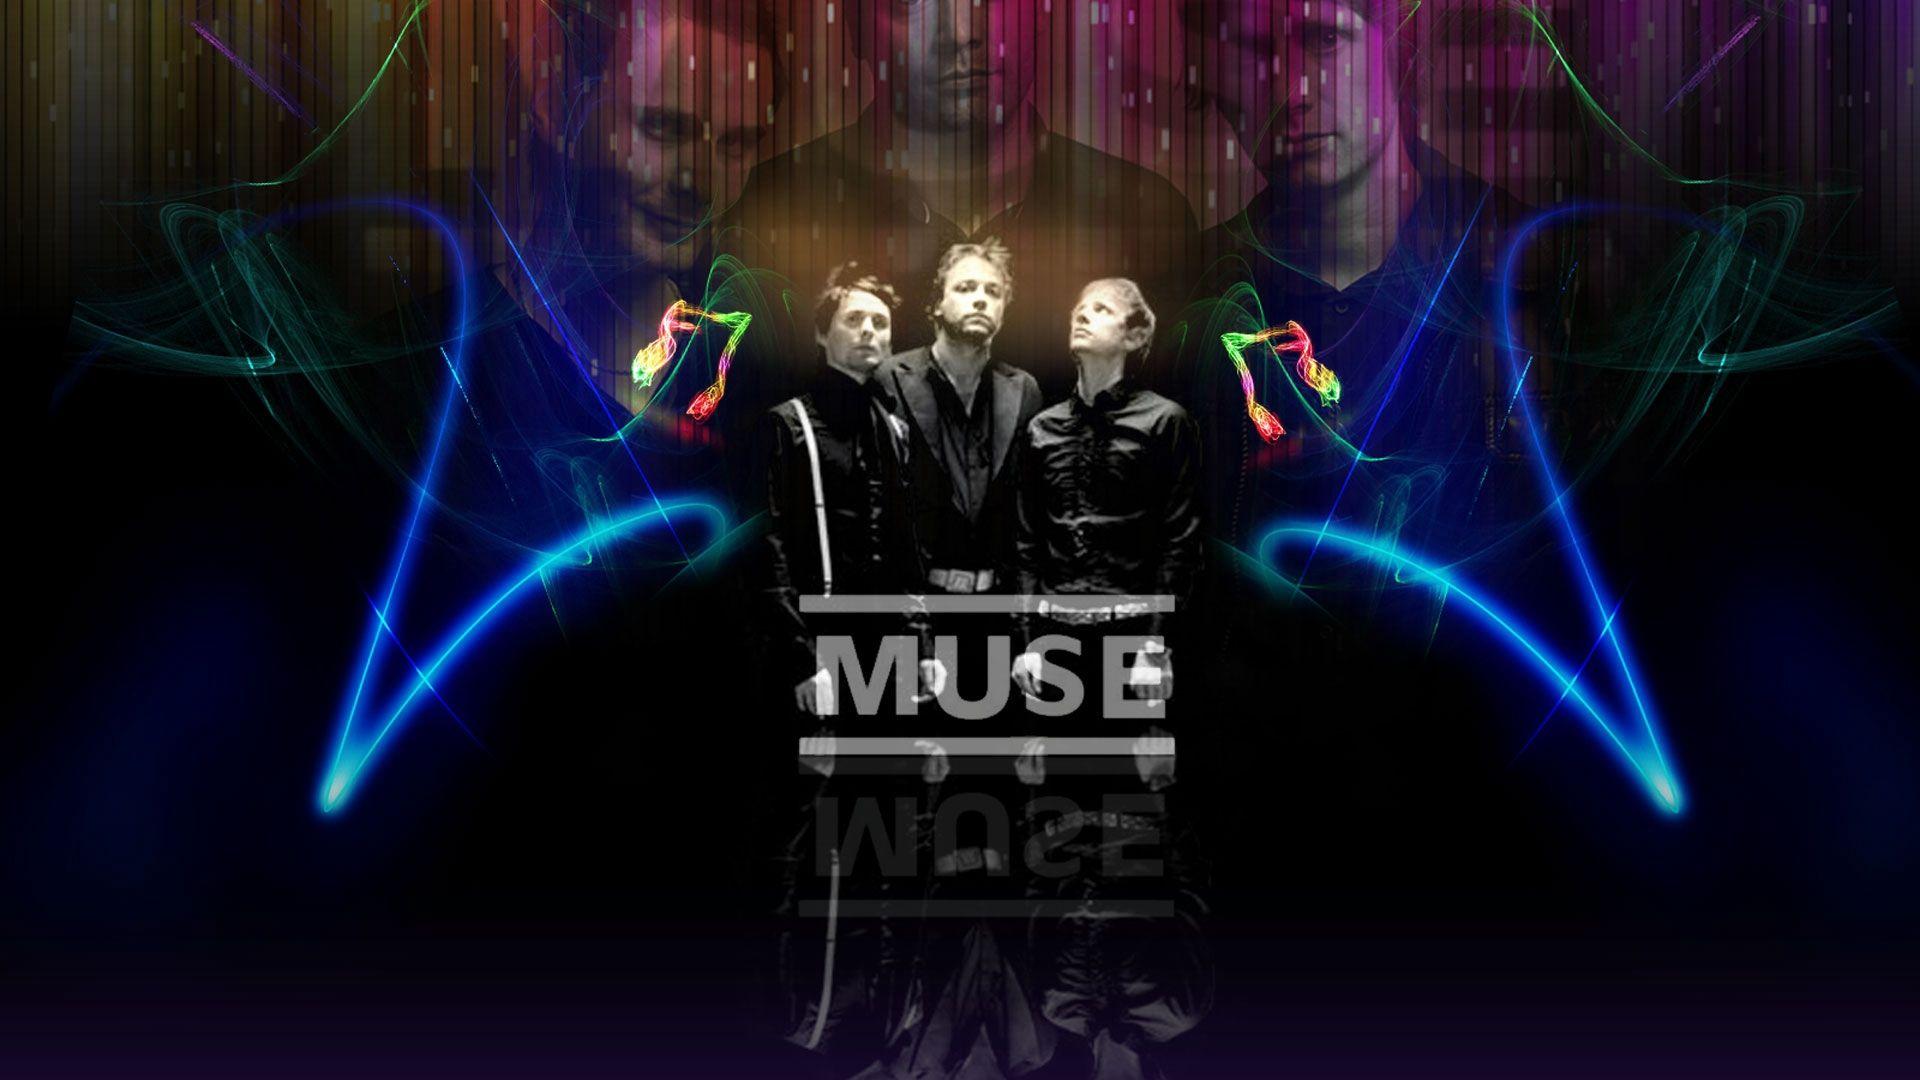 Download wallpaper 1920x1080 muse, band, members, background